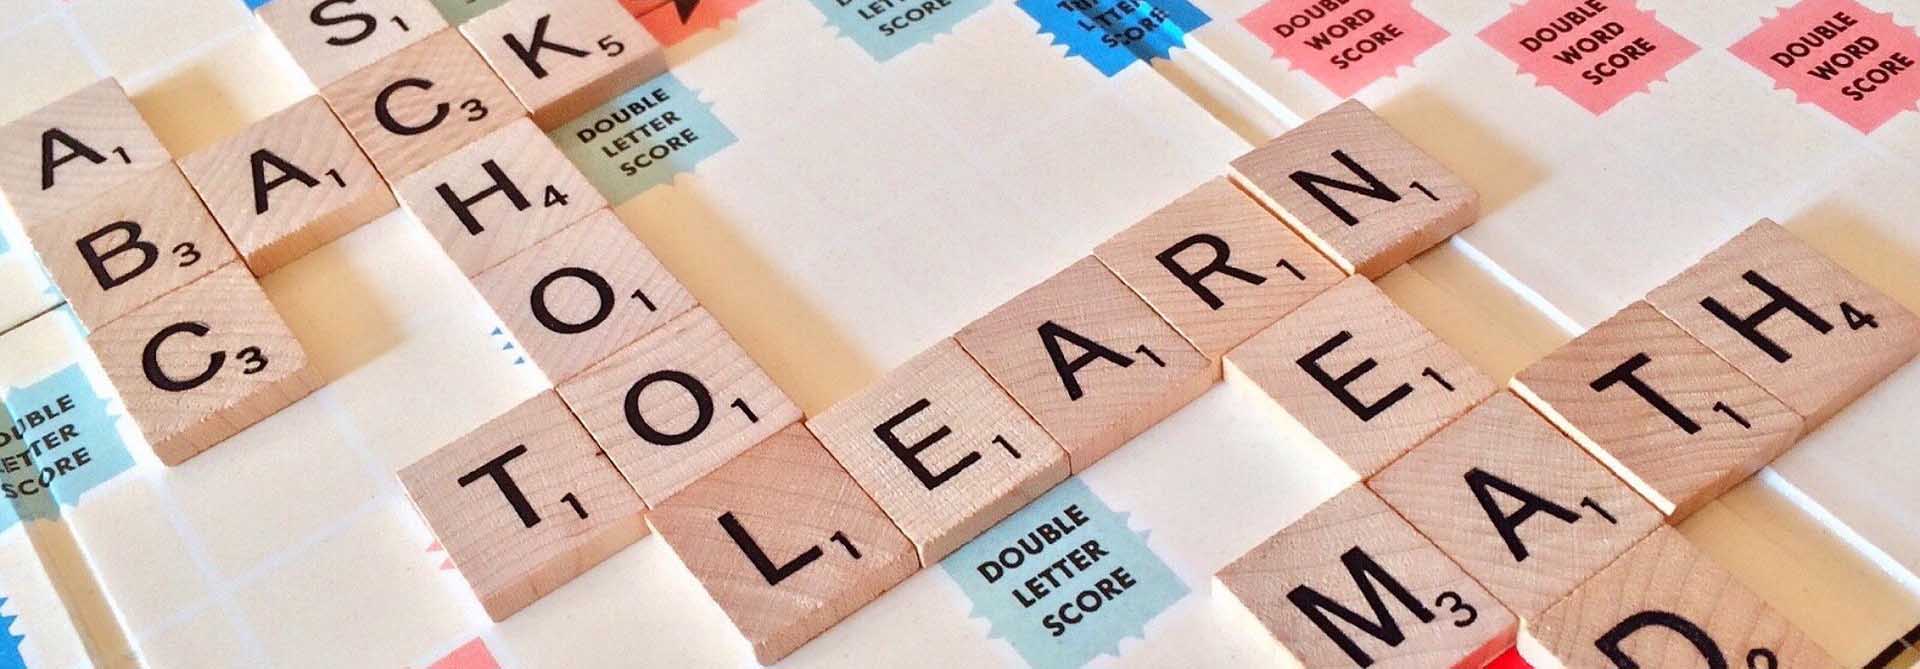 INDOOR ARENA: Board Games - Scrabble - is it time to go back to school yet?